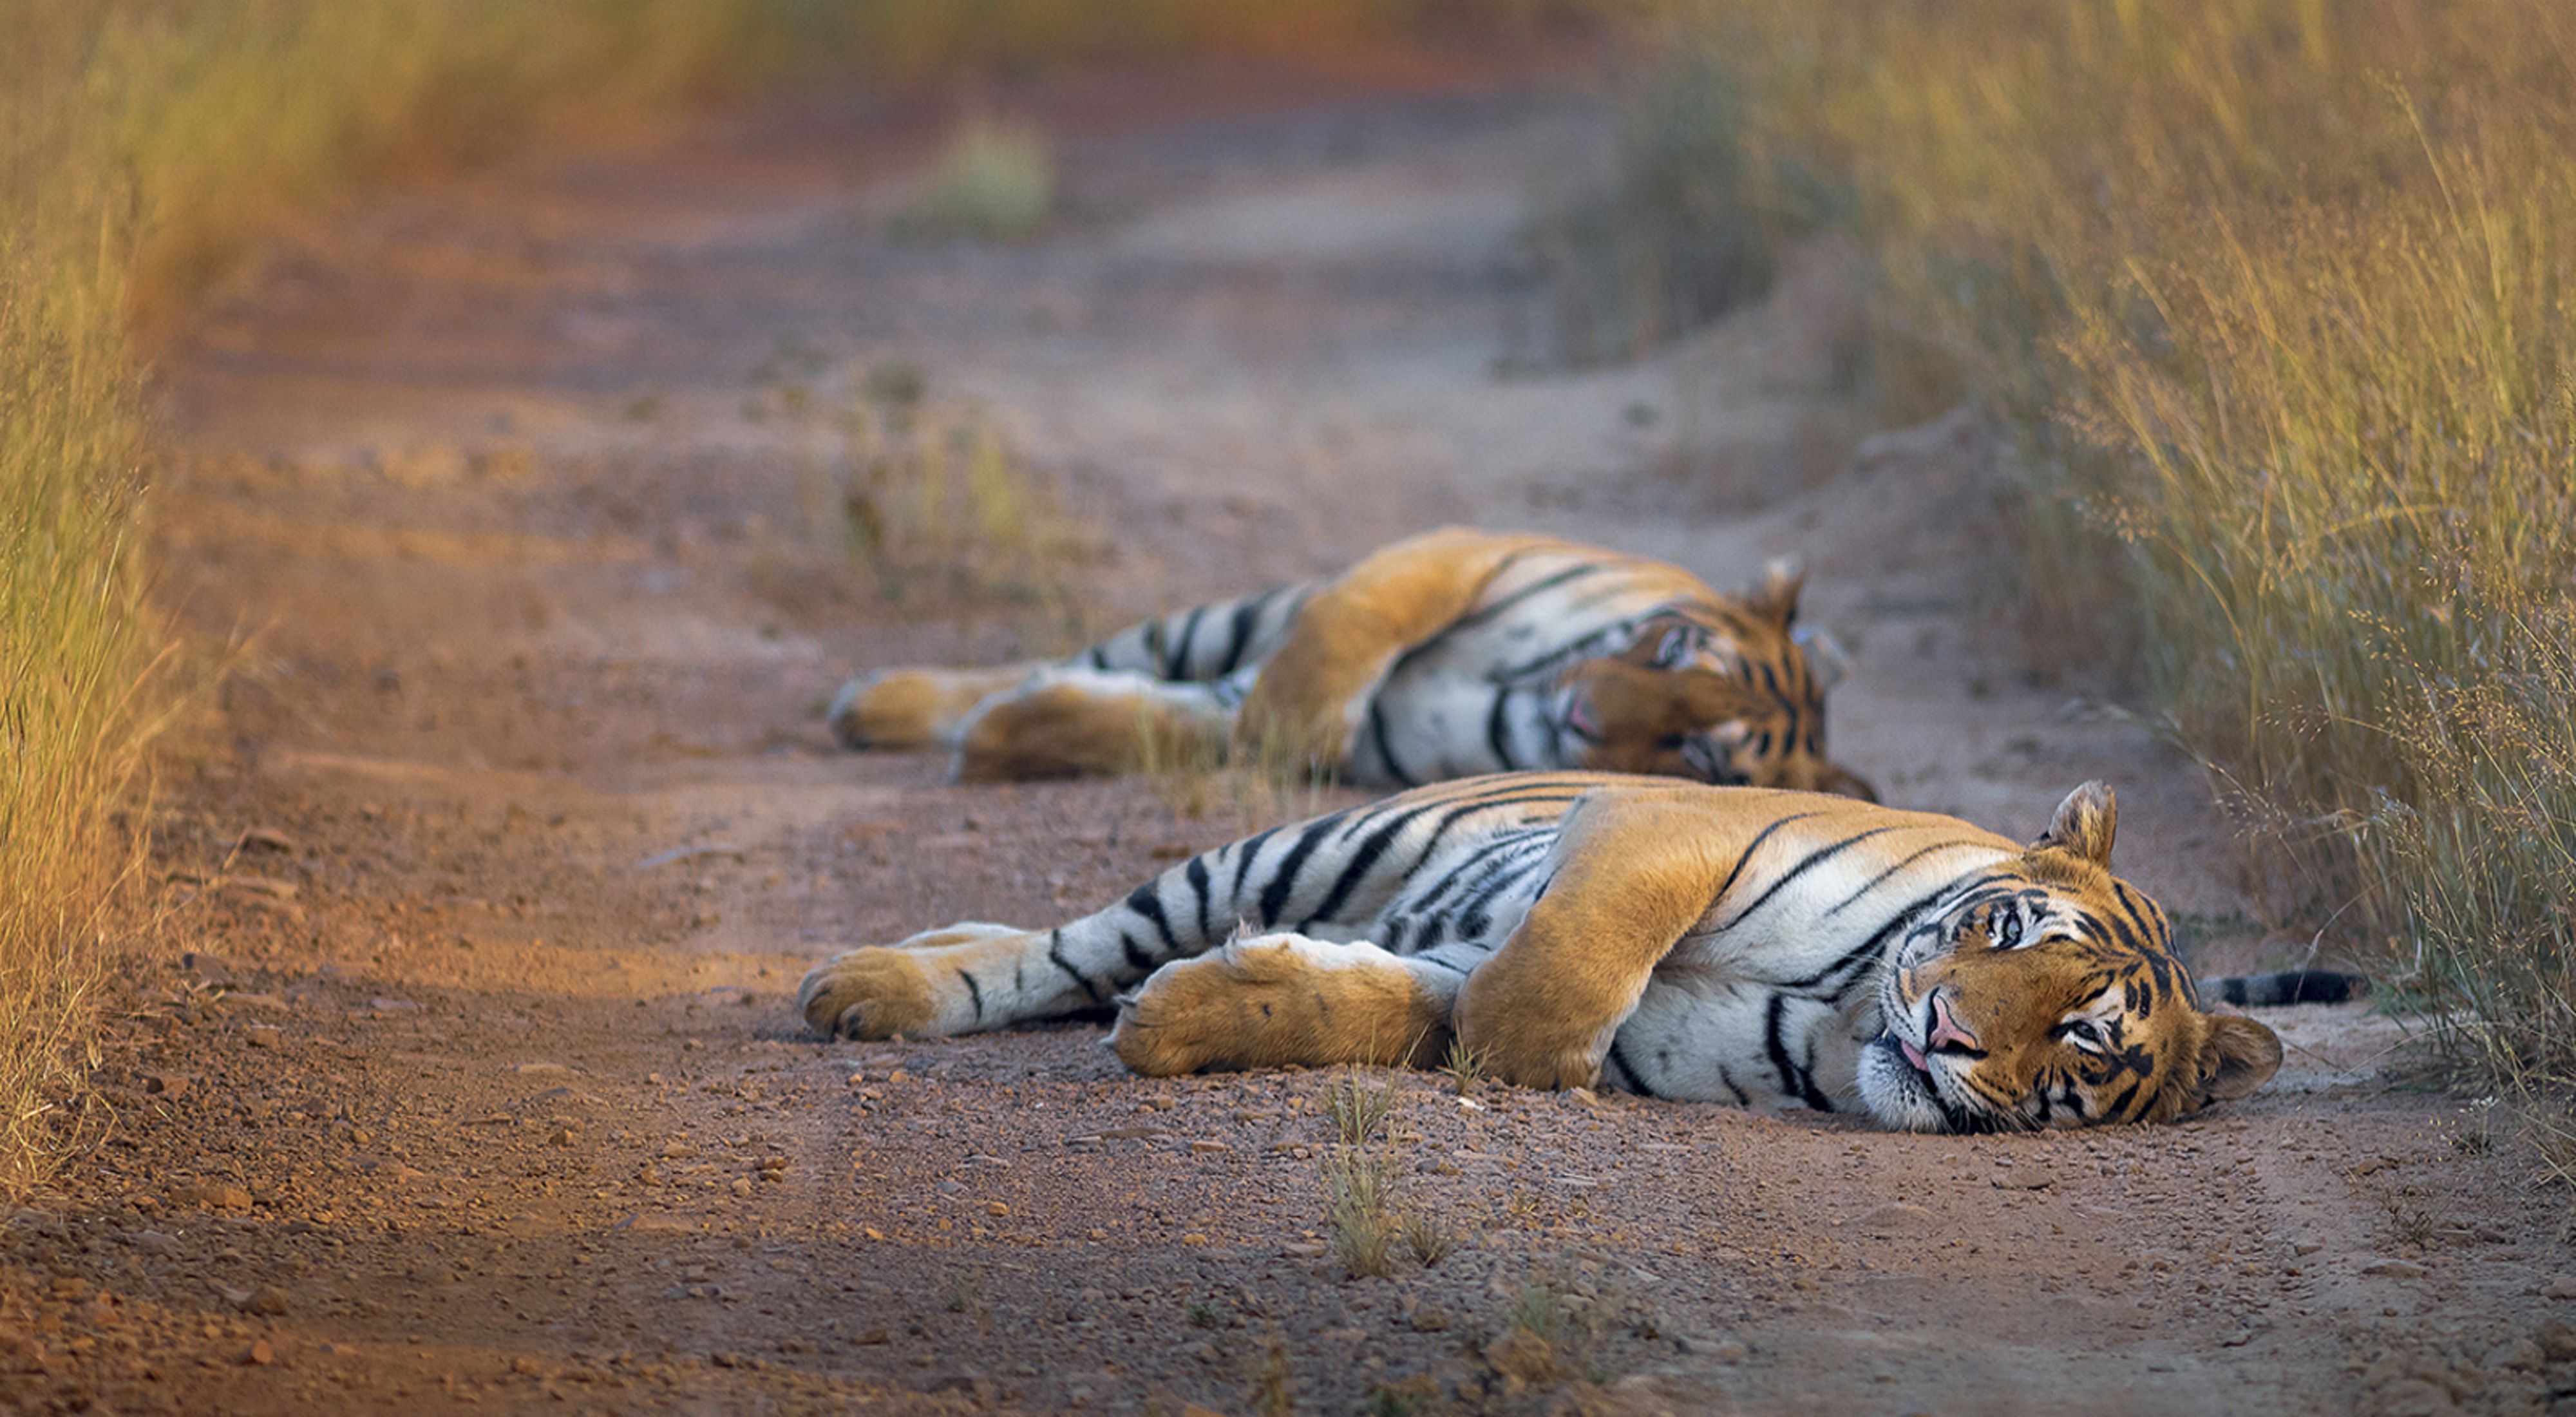 Two tigers lie on a dirt road; the one in the foreground looks at the camera.